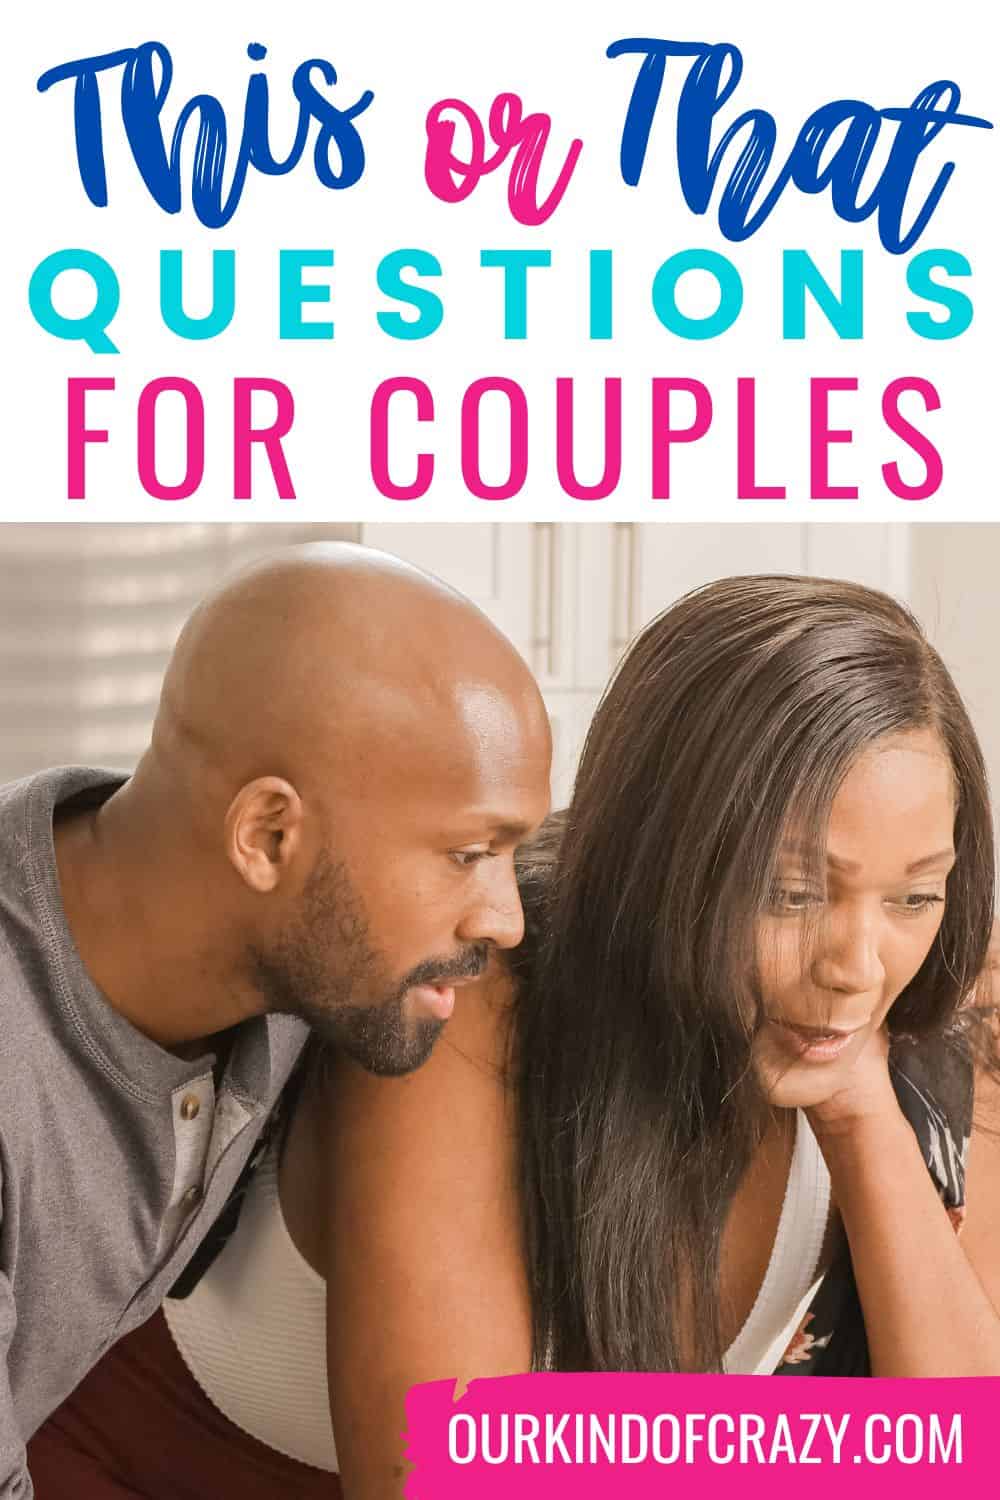 This or That Questions For Couples